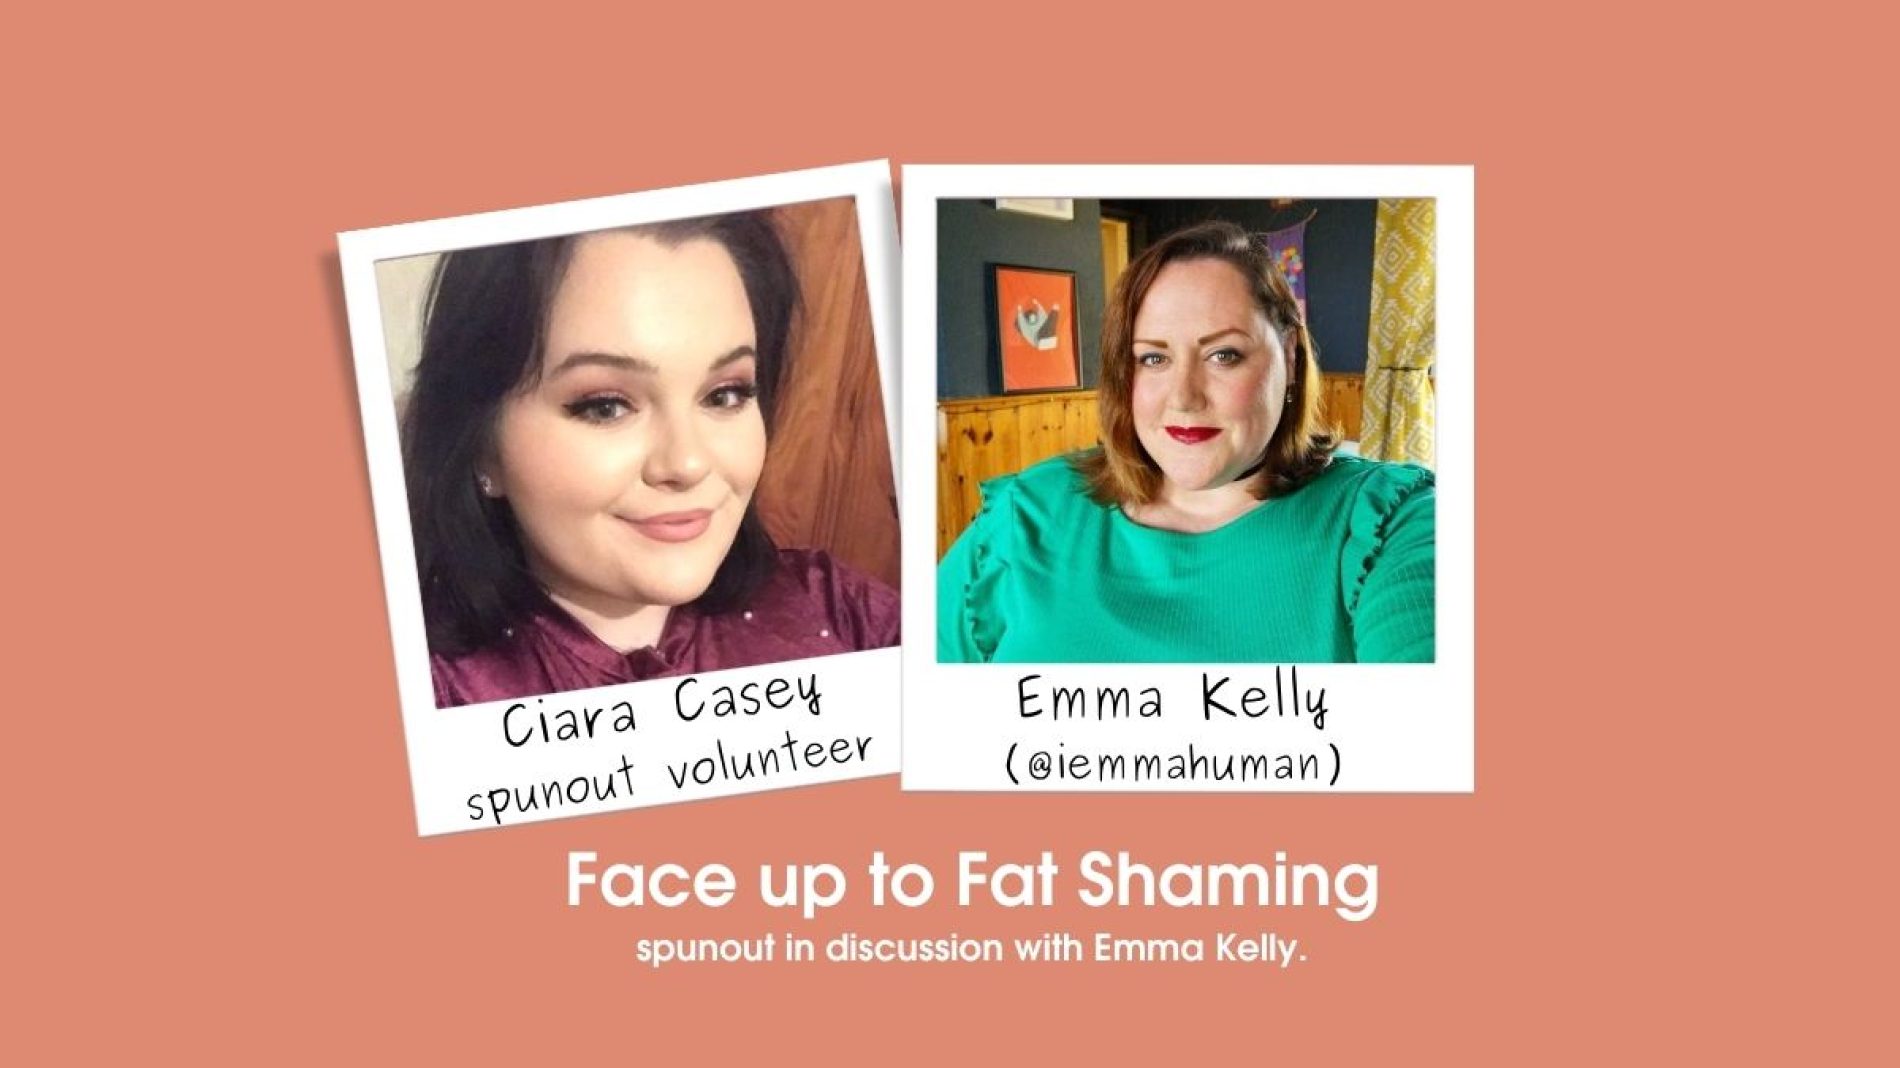 Polaroid style selfies of both Ciara and Emma are set against a coral background - Face up to fatshaming podcast